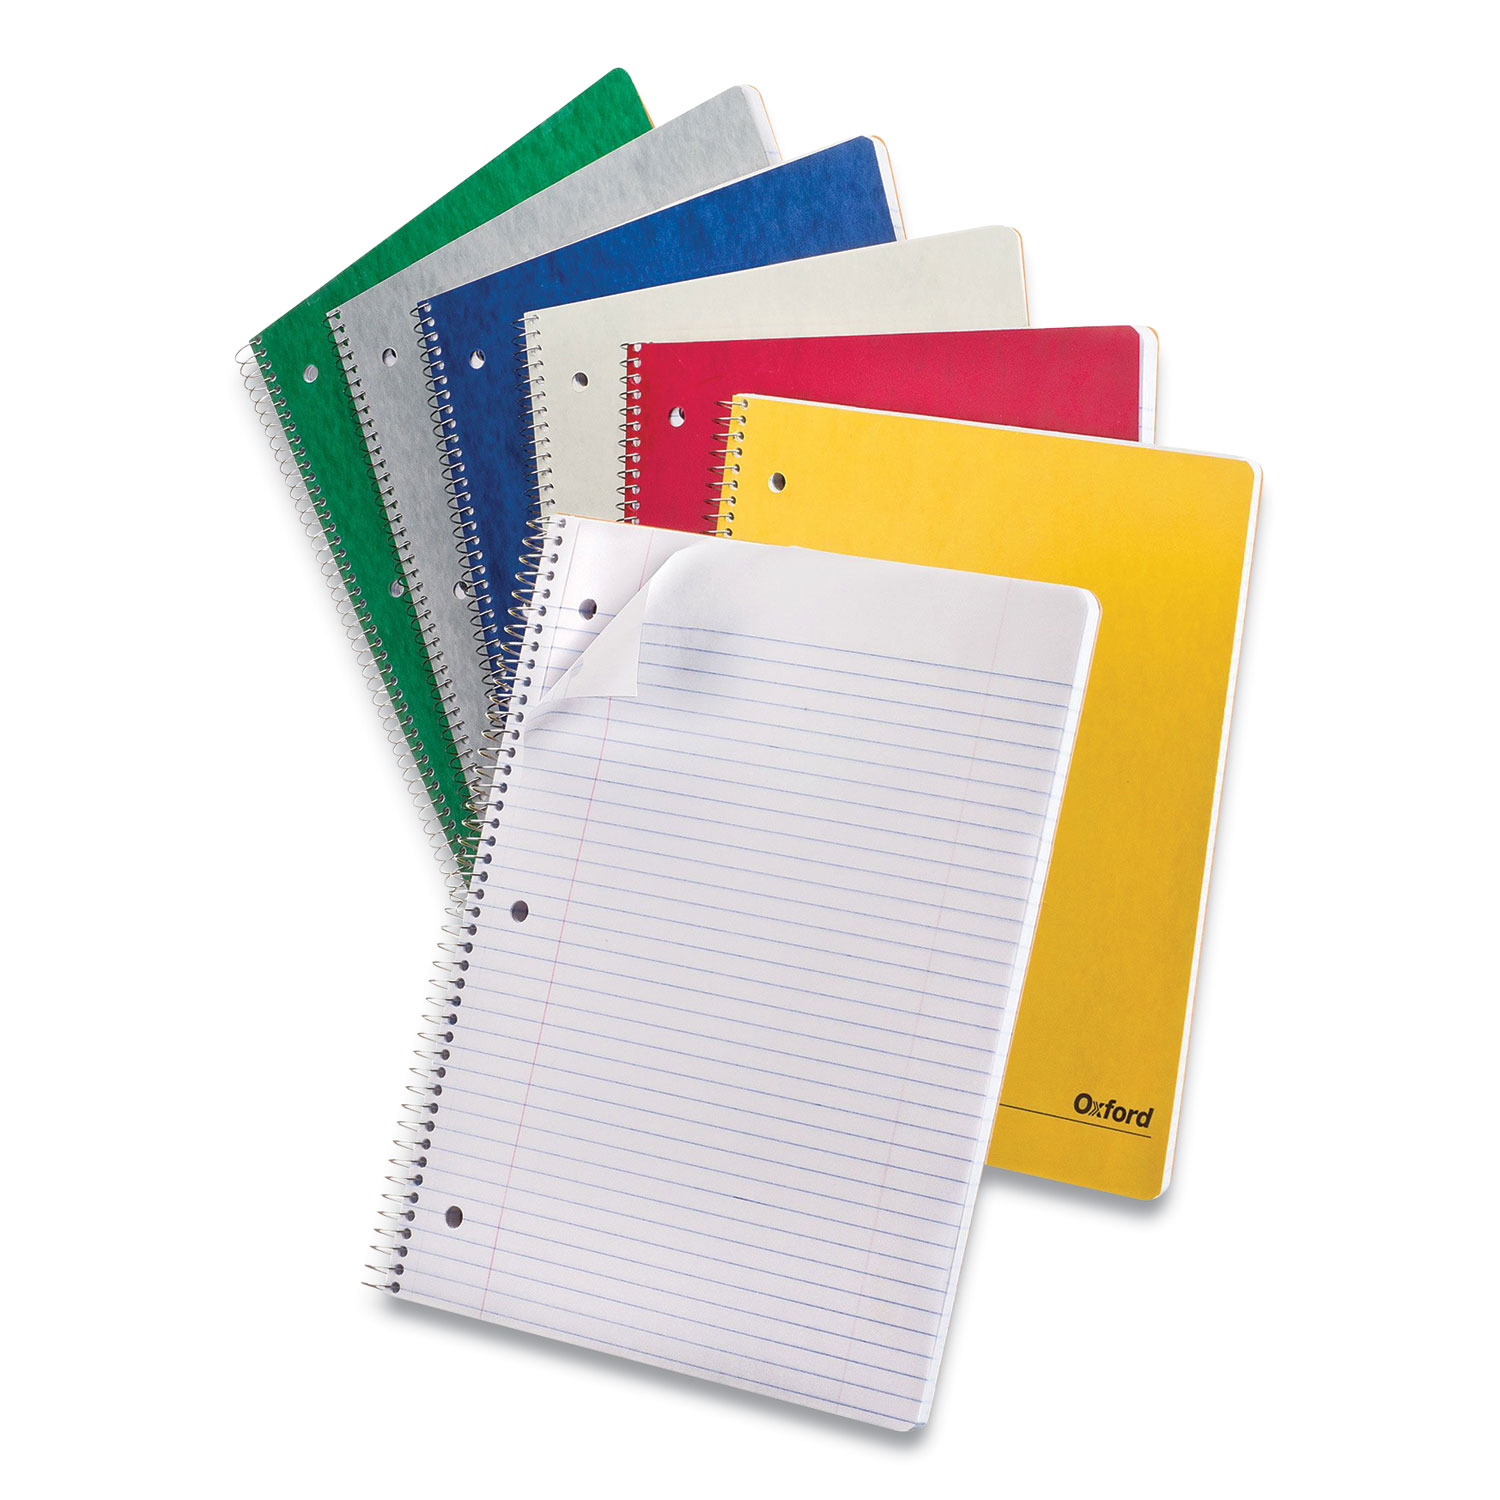  Oxford 25-009R One-Subject Notebook, Medium/College Rule, Assorted Colors, 9 x 11, 100 Sheets, 6/Pack (OXF397974) 